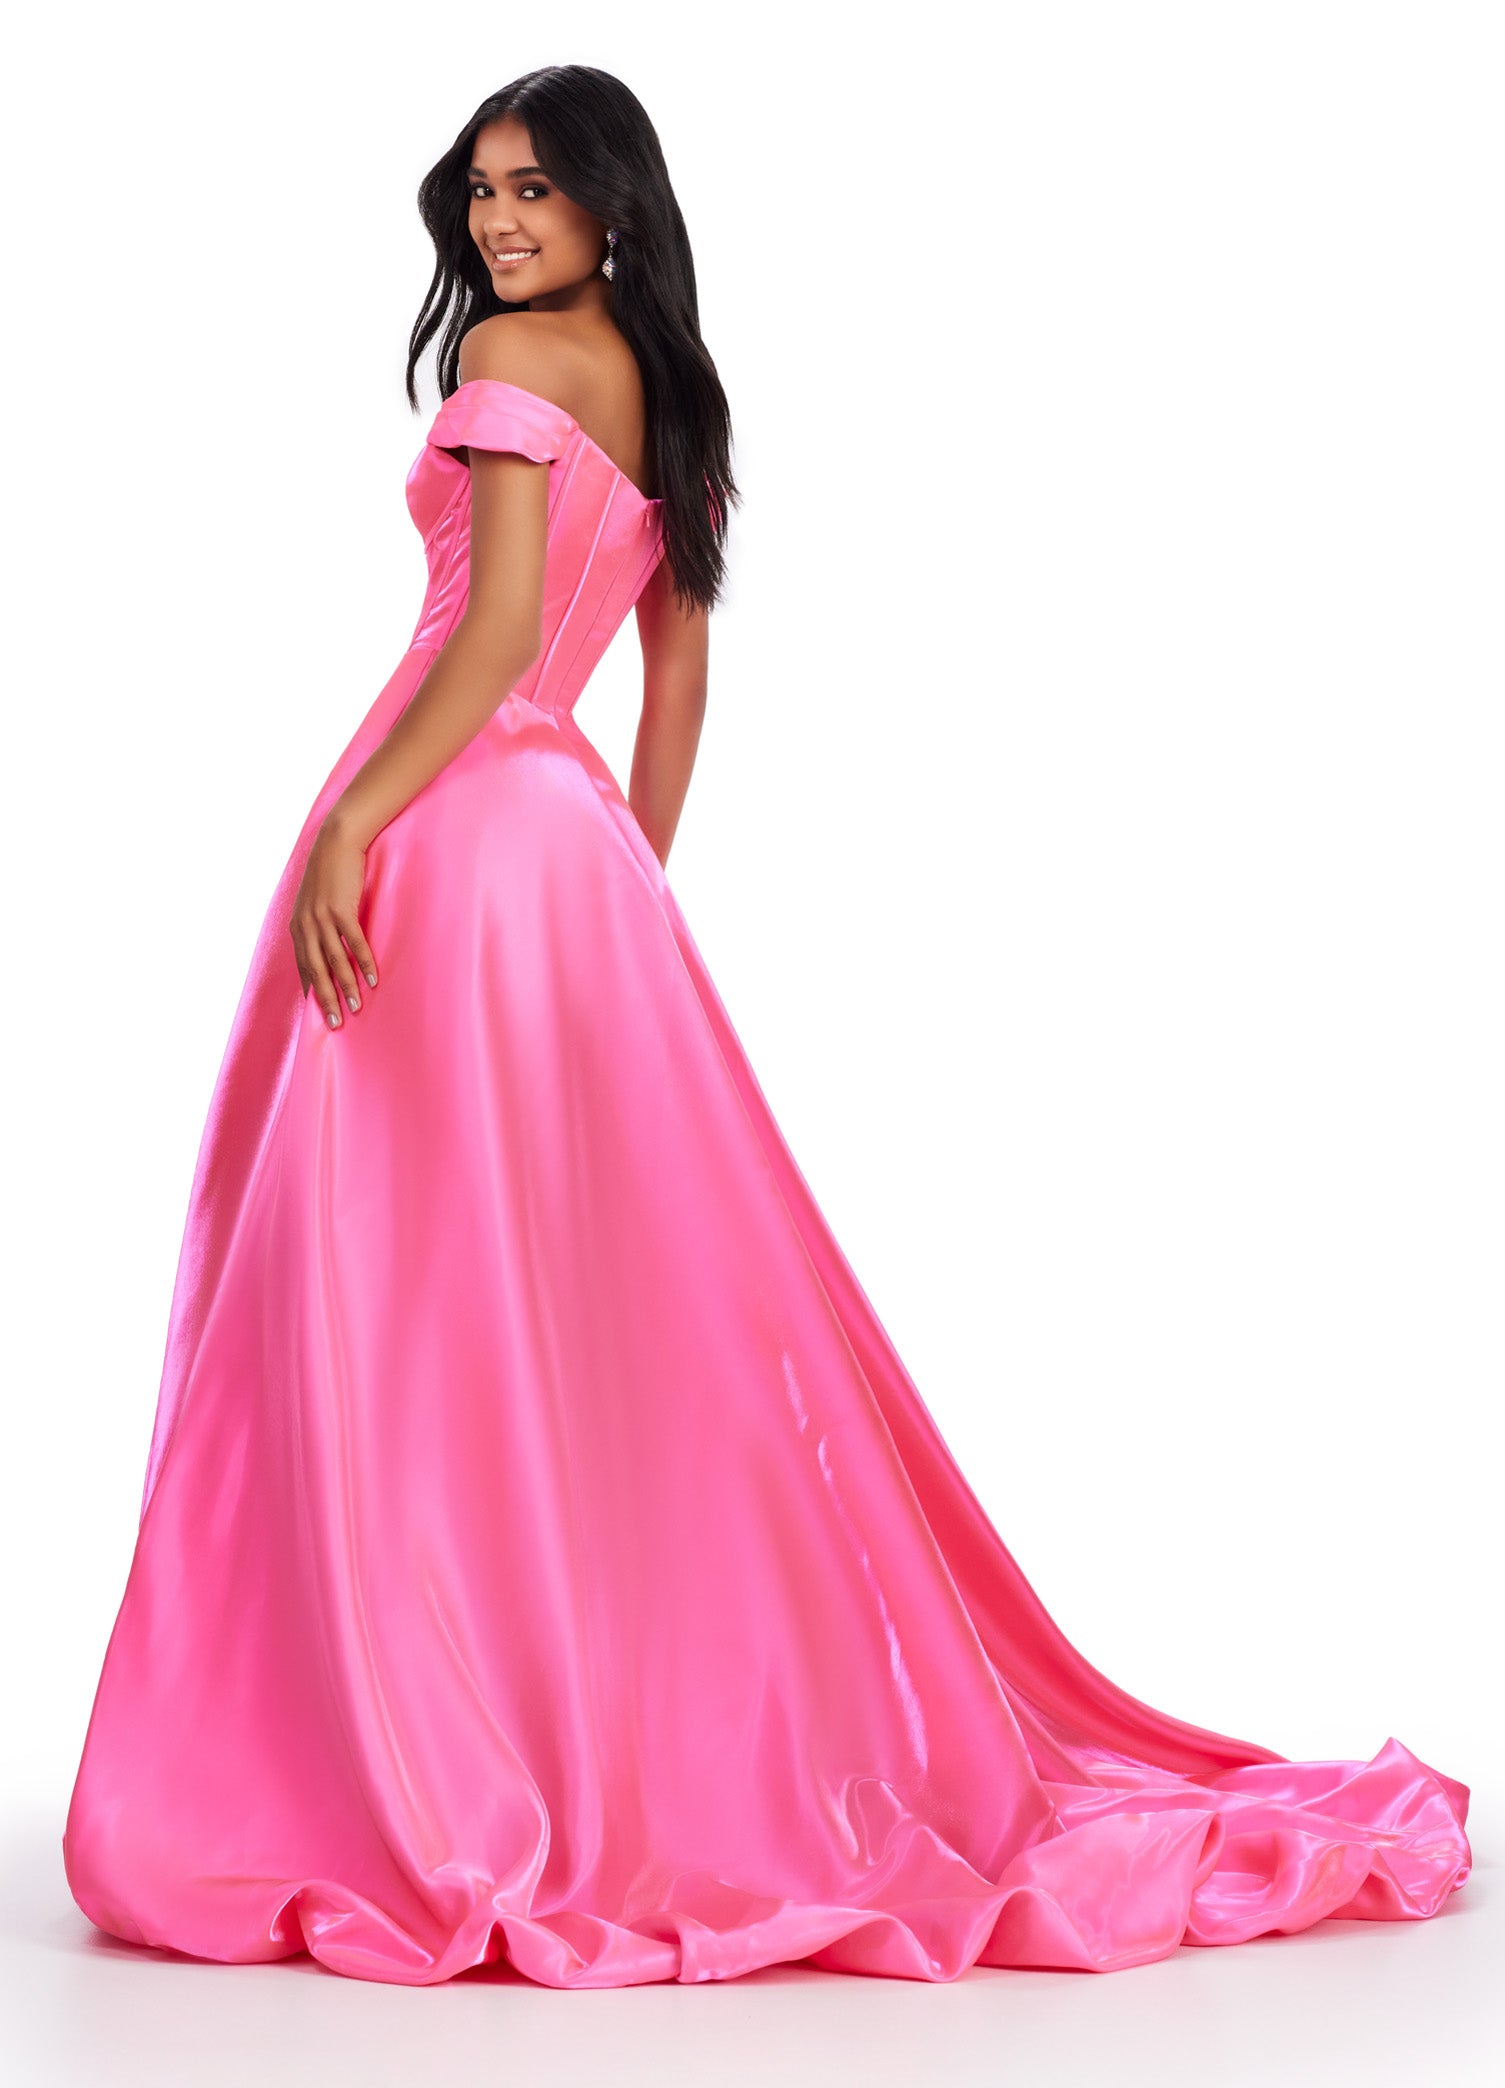 Experience effortless elegance in the Ashley Lauren 11641 Long Prom Dress. Featuring an off-shoulder neckline and high-low satin gown, this formal pageant gown exudes glamour and sophistication. Perfect for making a grand entrance and turning heads at any event. This glamorous satin off the shoulder high low bubble hem gown features a corset style bodice.